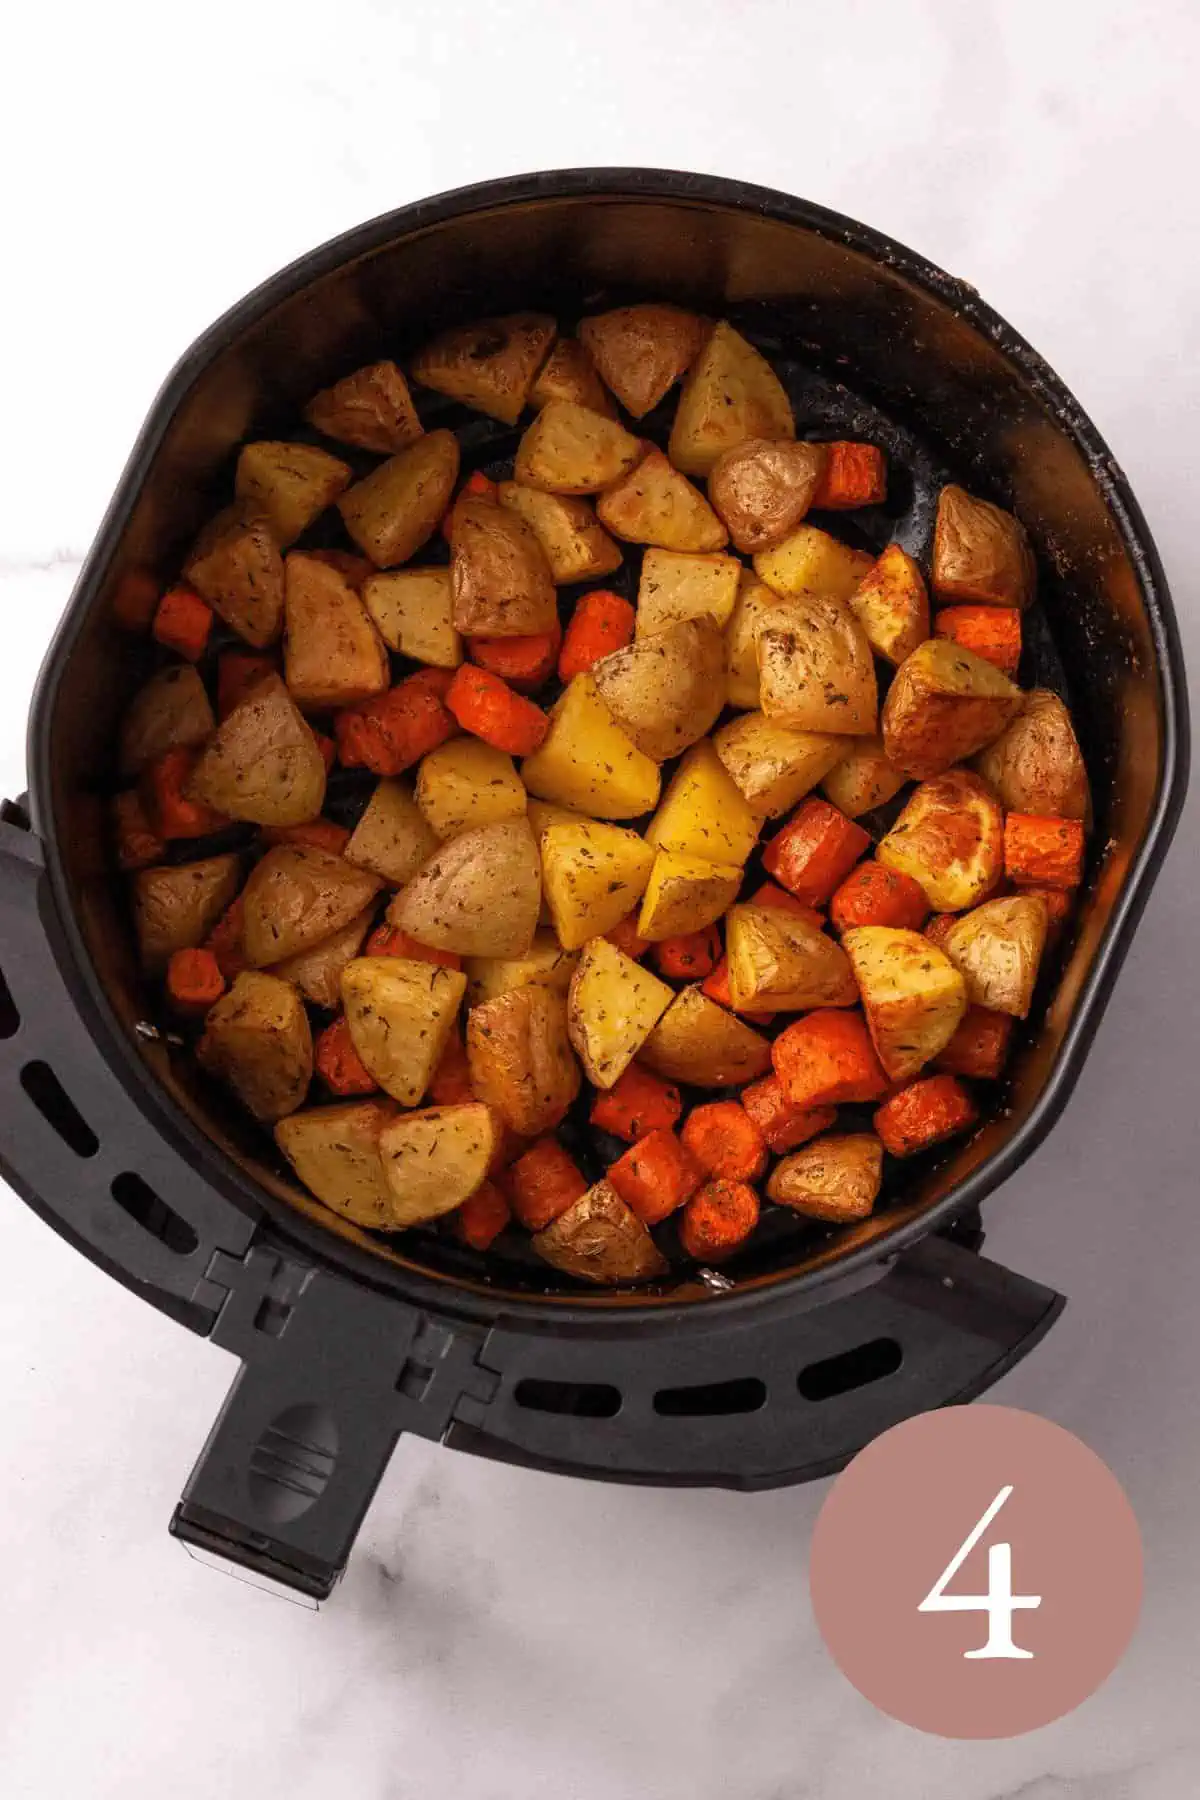 Overhead image of chopped potatoes and carrots in air fryer basket before frying